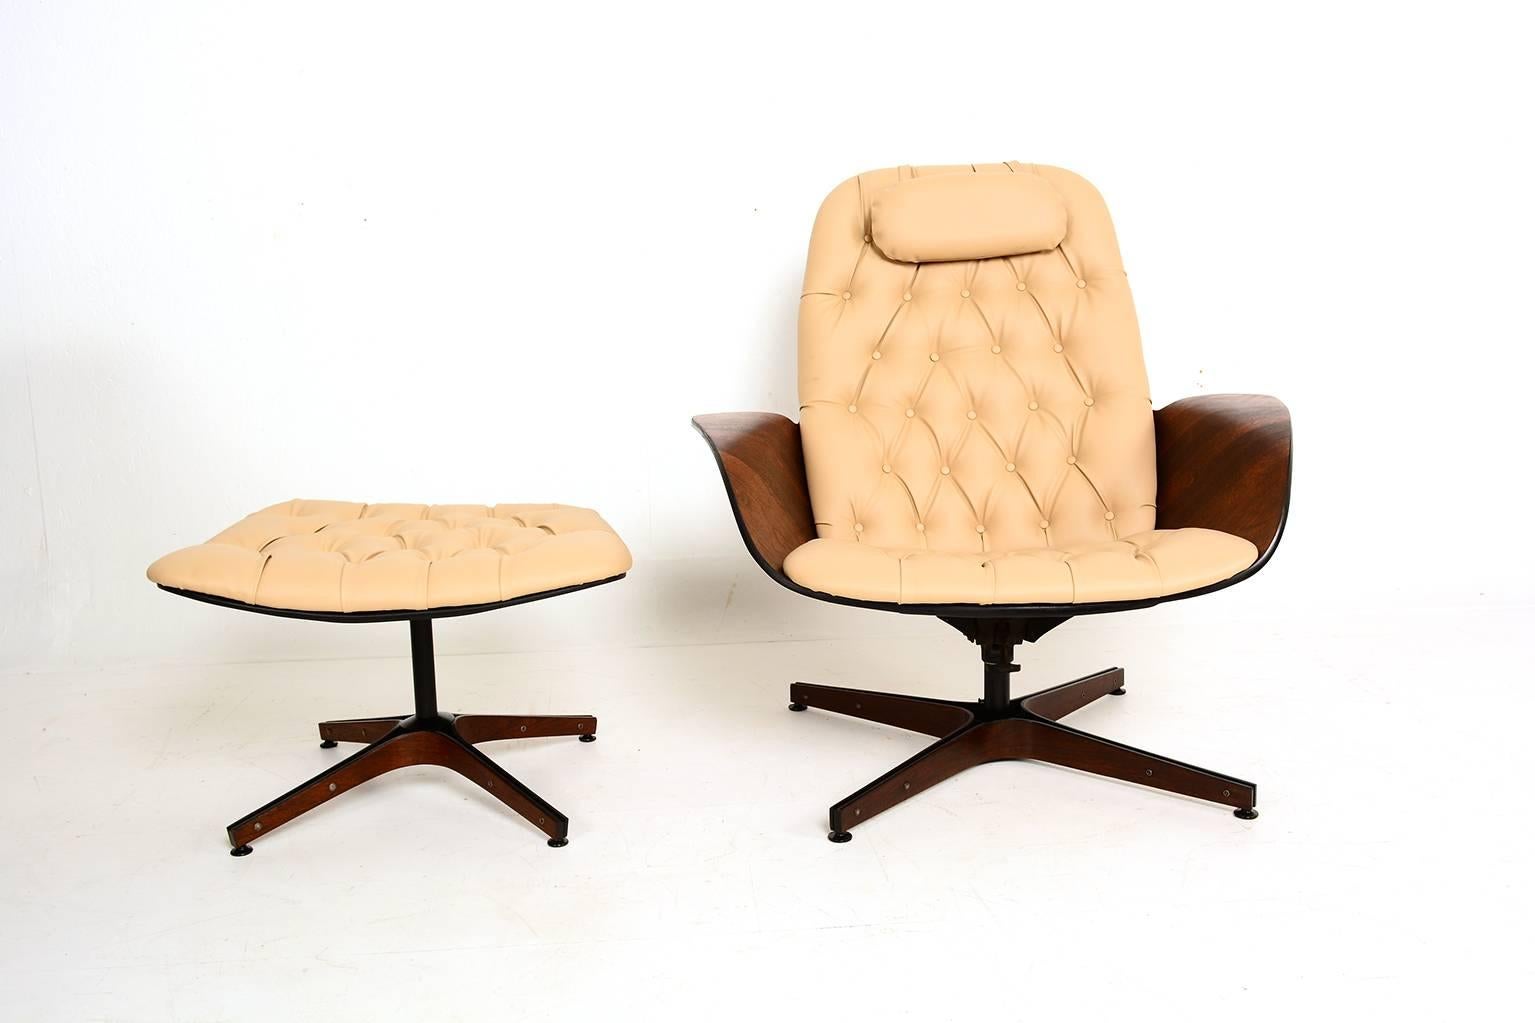 For your consideration a vintage lounge chair and matching ottoman designed by George Mulhauser for PLYCRAFT. USA Circa 1960s. 

Beautiful restored condition, ready to go. Bent walnut plywood with tufted naugahyde in ivory color.

For higher